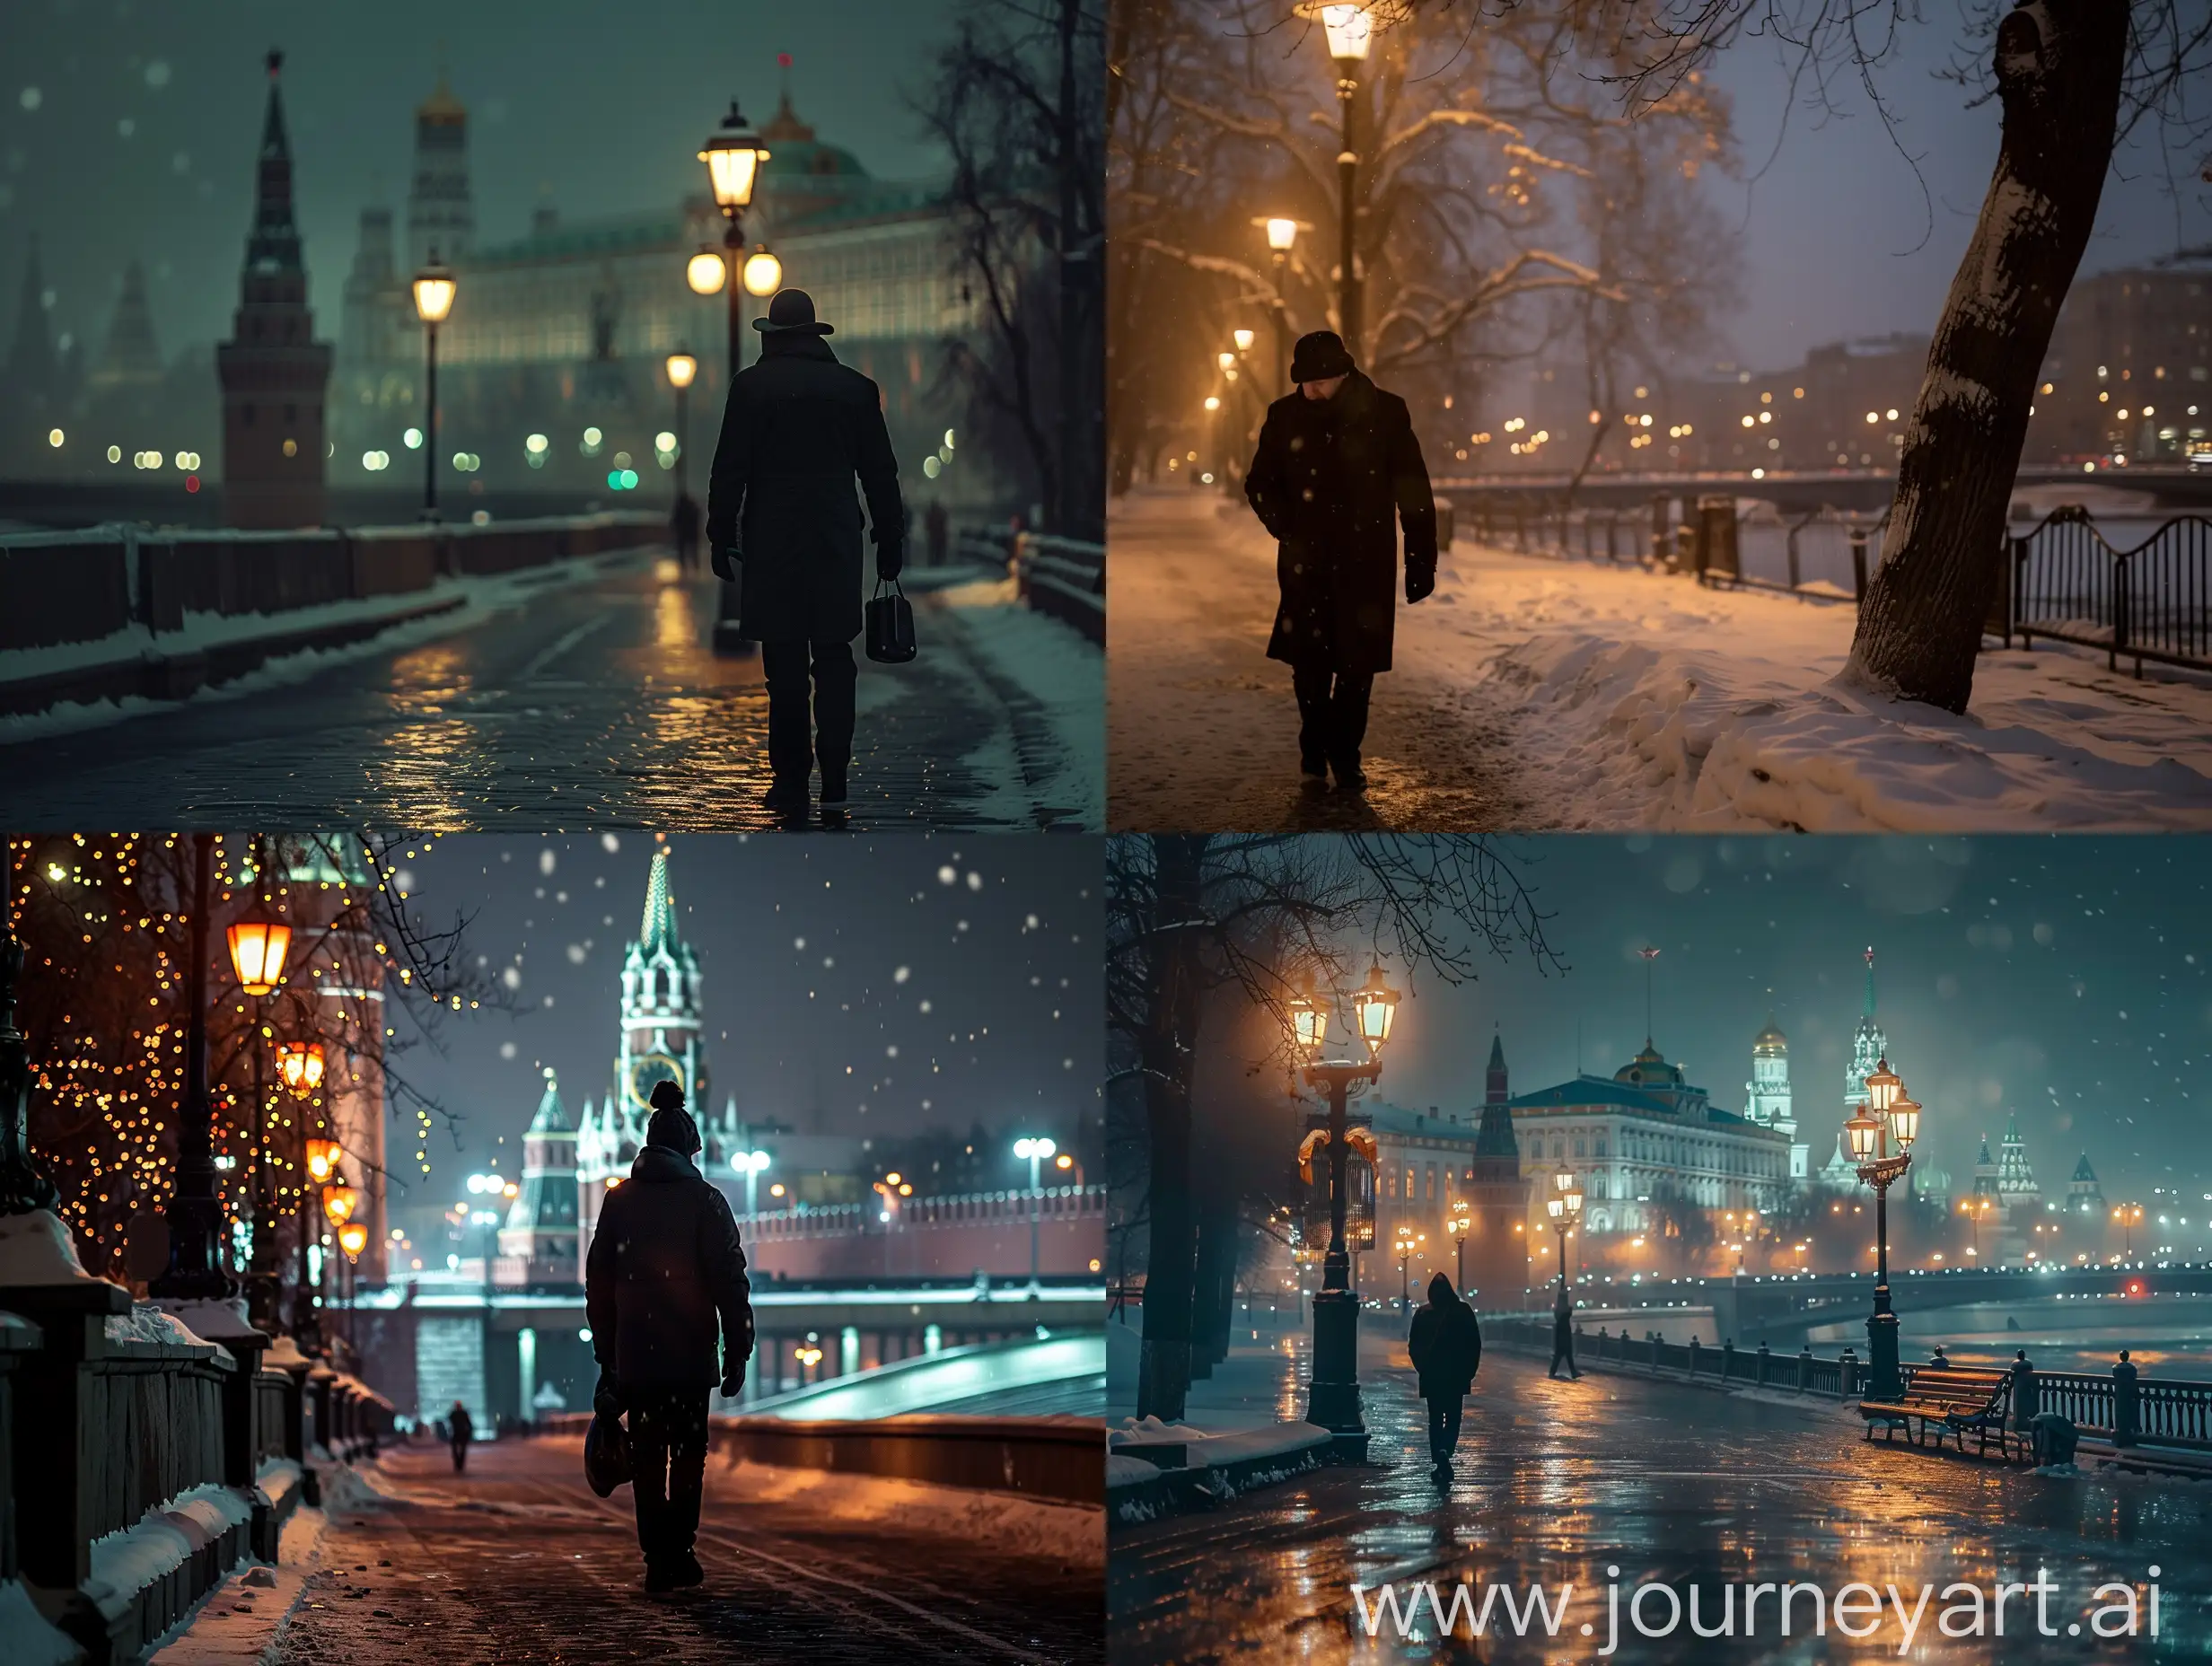 Pedro Sanchez takes a walk in Moscow, in late winter, at night, cinematic lighting, a pro photo